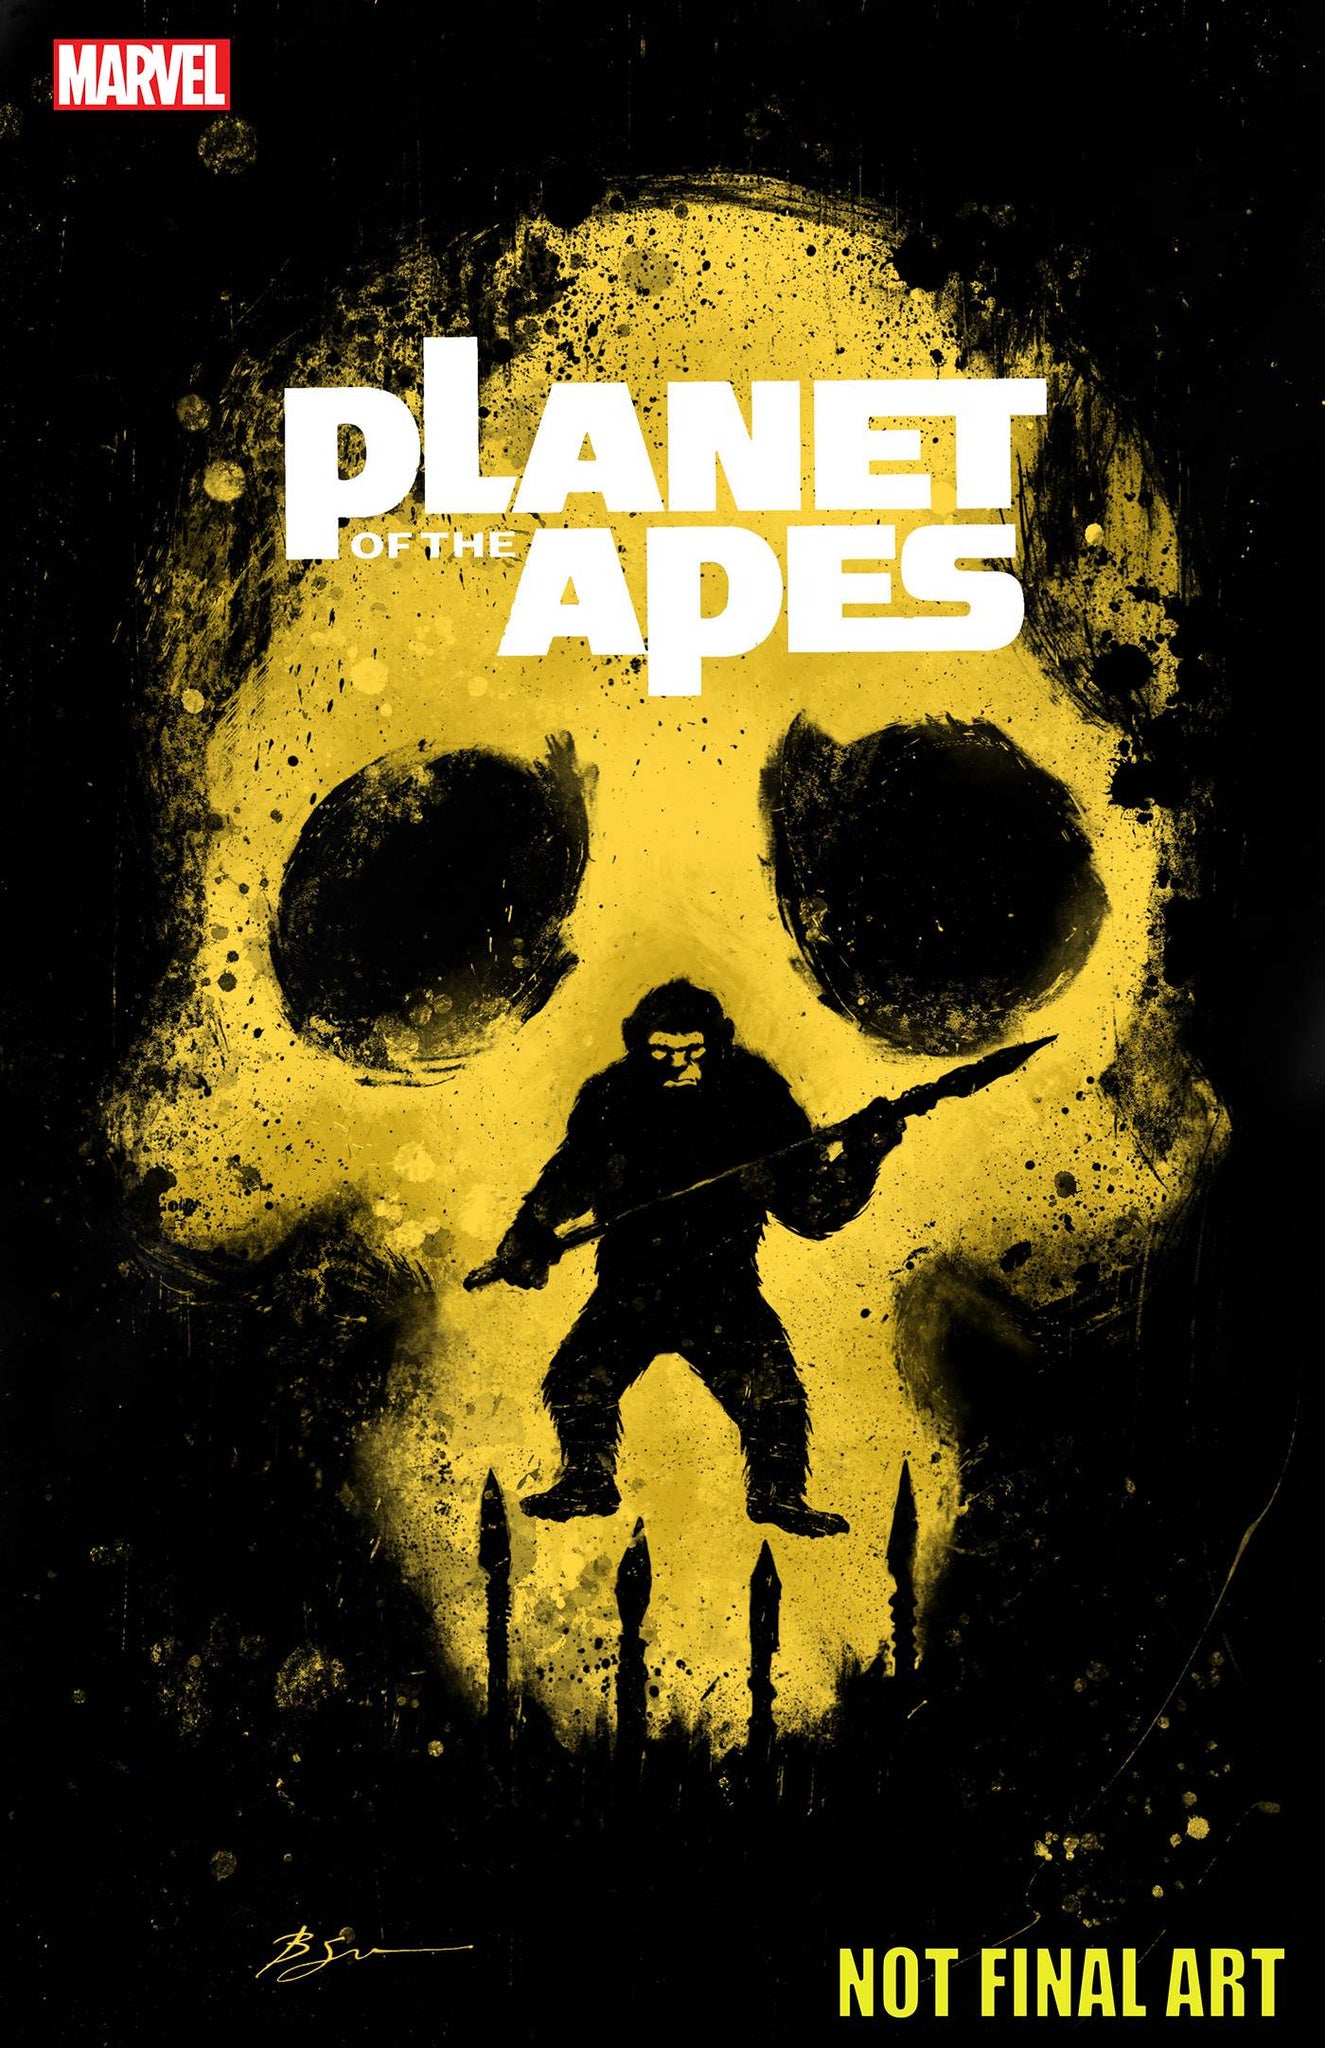 PLANET OF THE APES #3